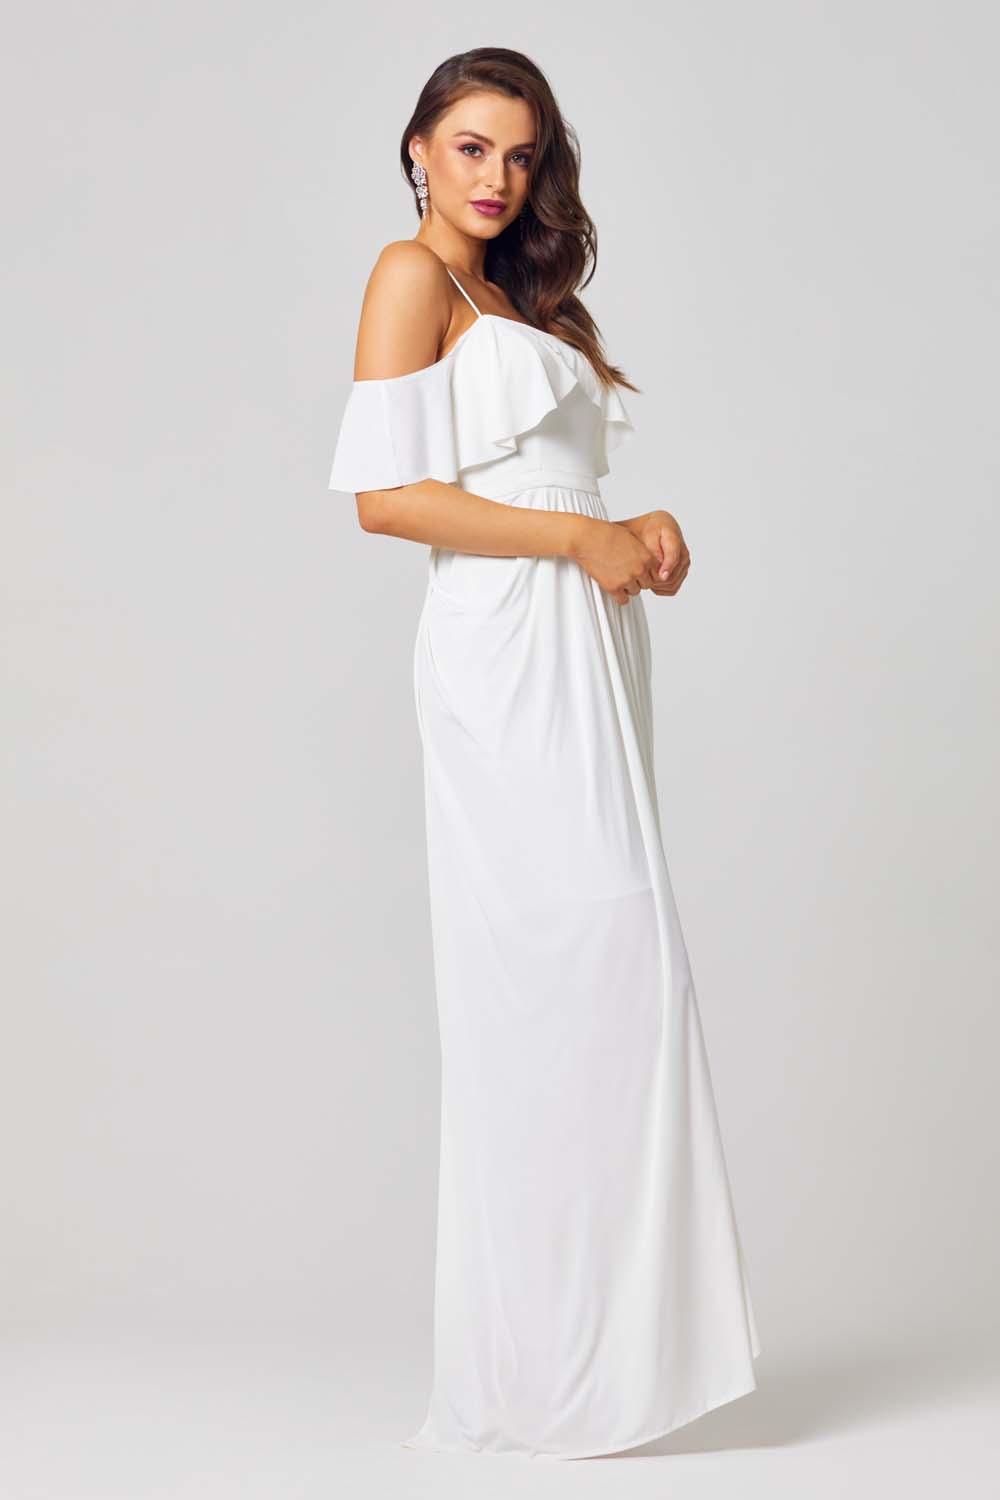 ARIANNA TO803 Bridesmaids dress by Tania Olsen Designs